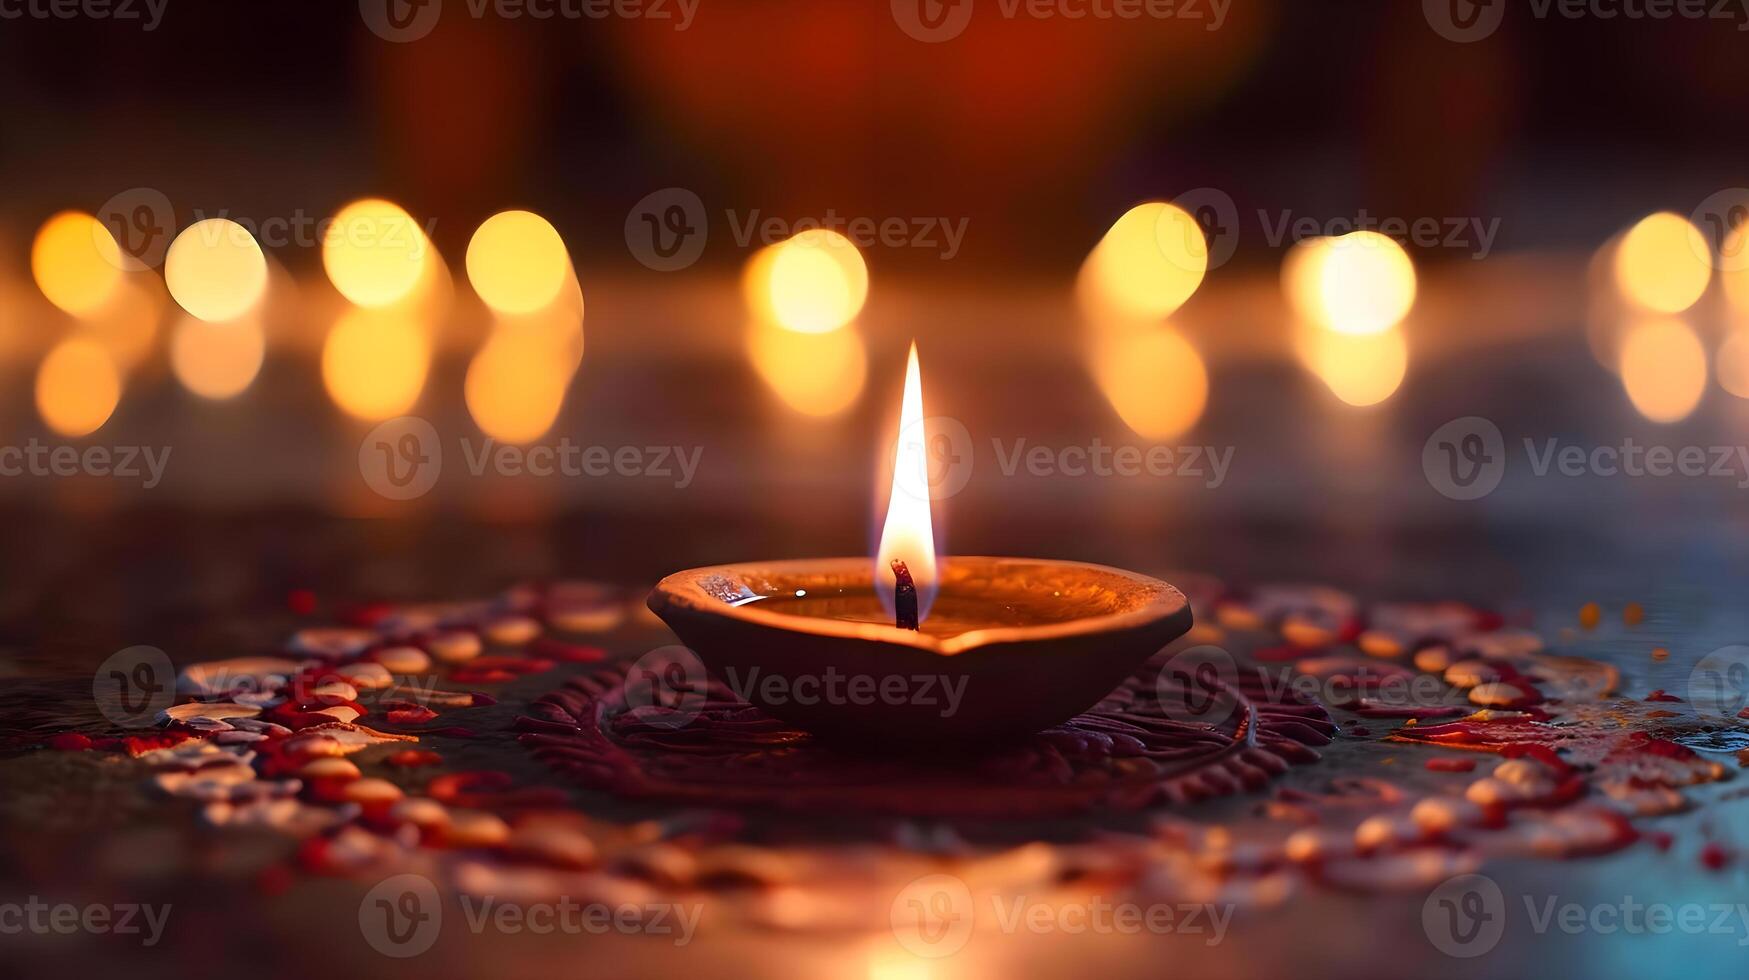 AI generated a small bowl with a lit candle in it photo